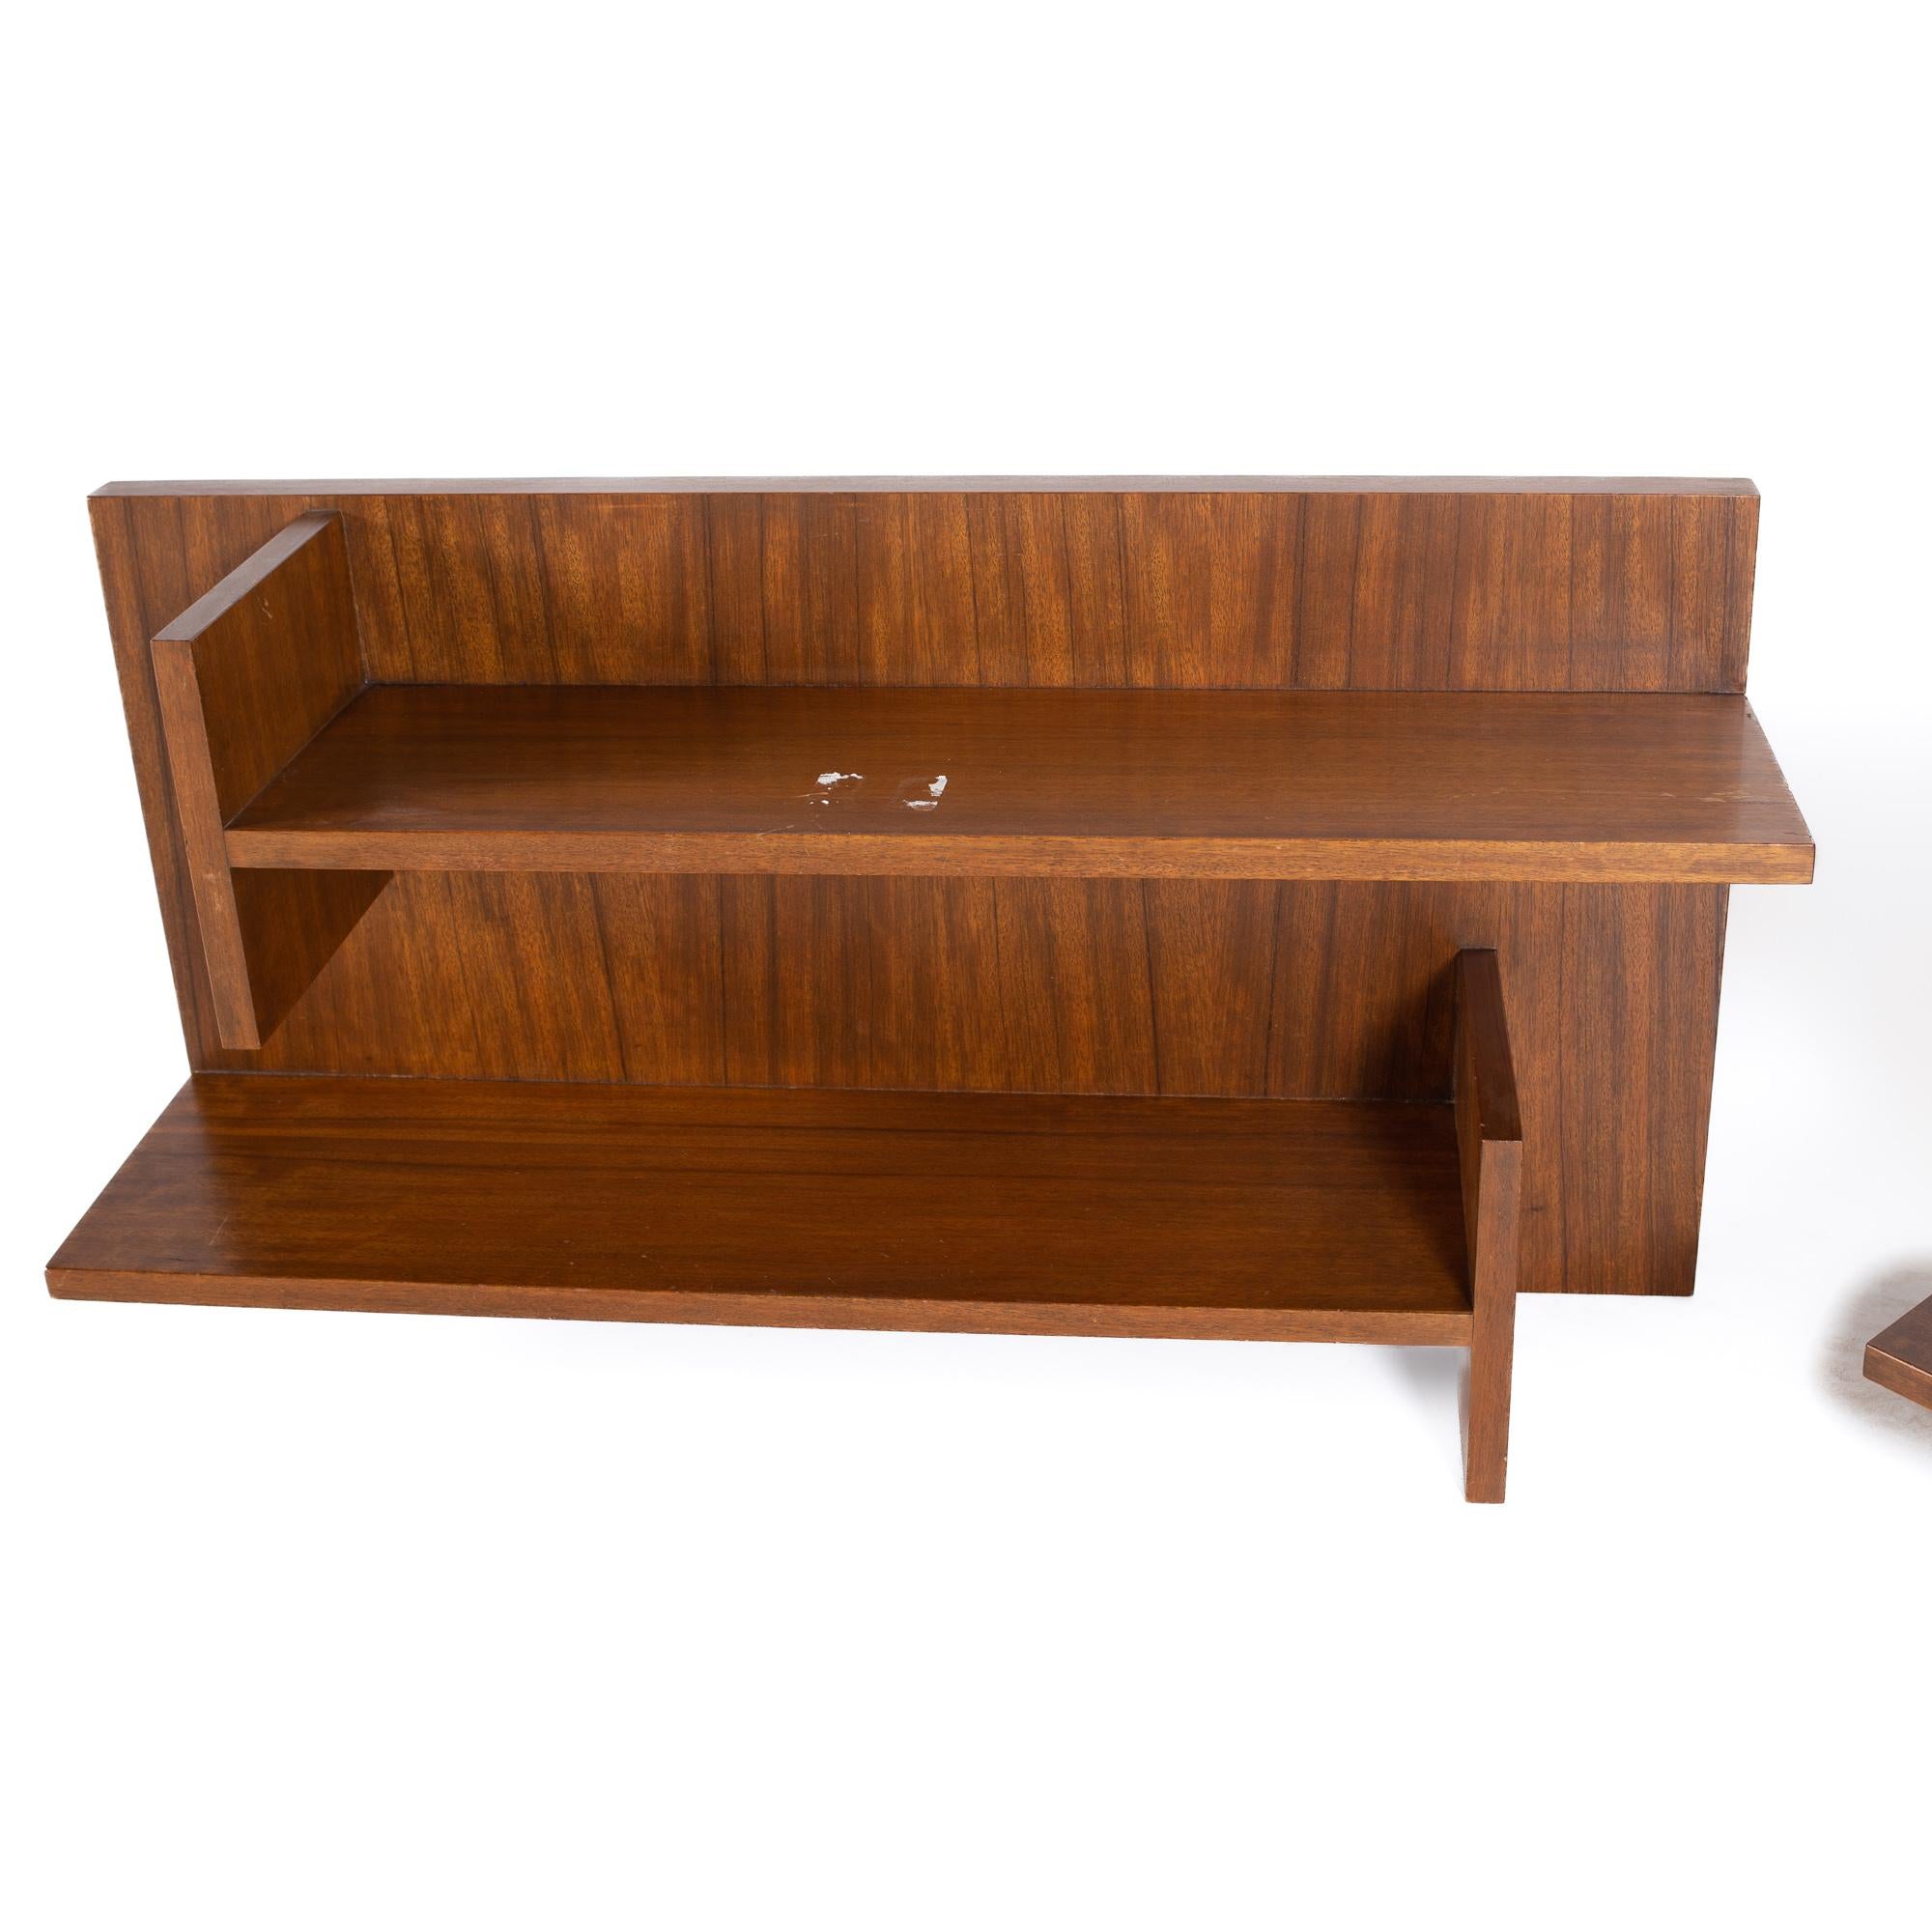 American Mid Century Walnut Floating Shelves, a Pair For Sale